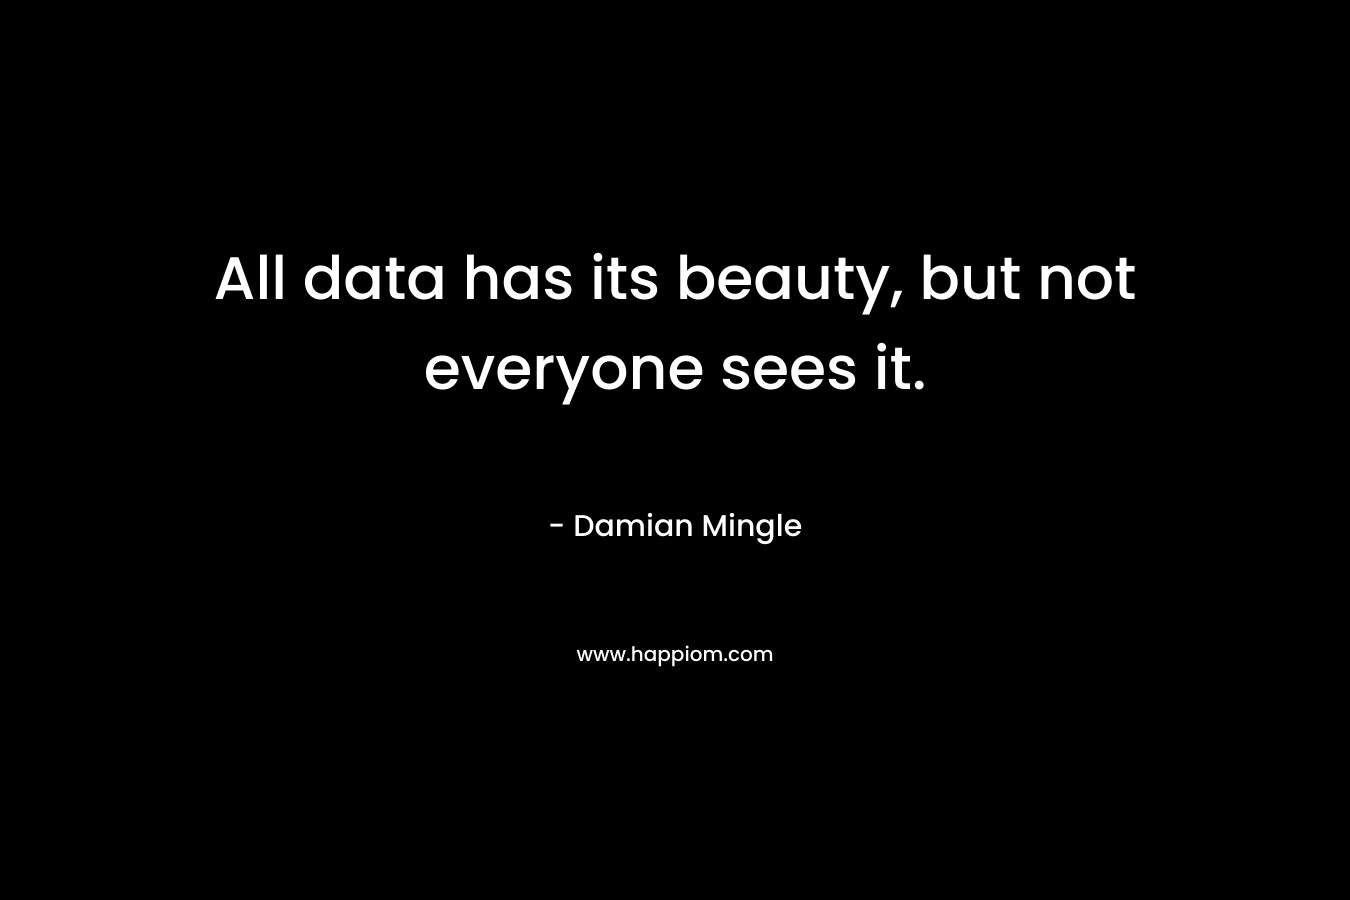 All data has its beauty, but not everyone sees it.